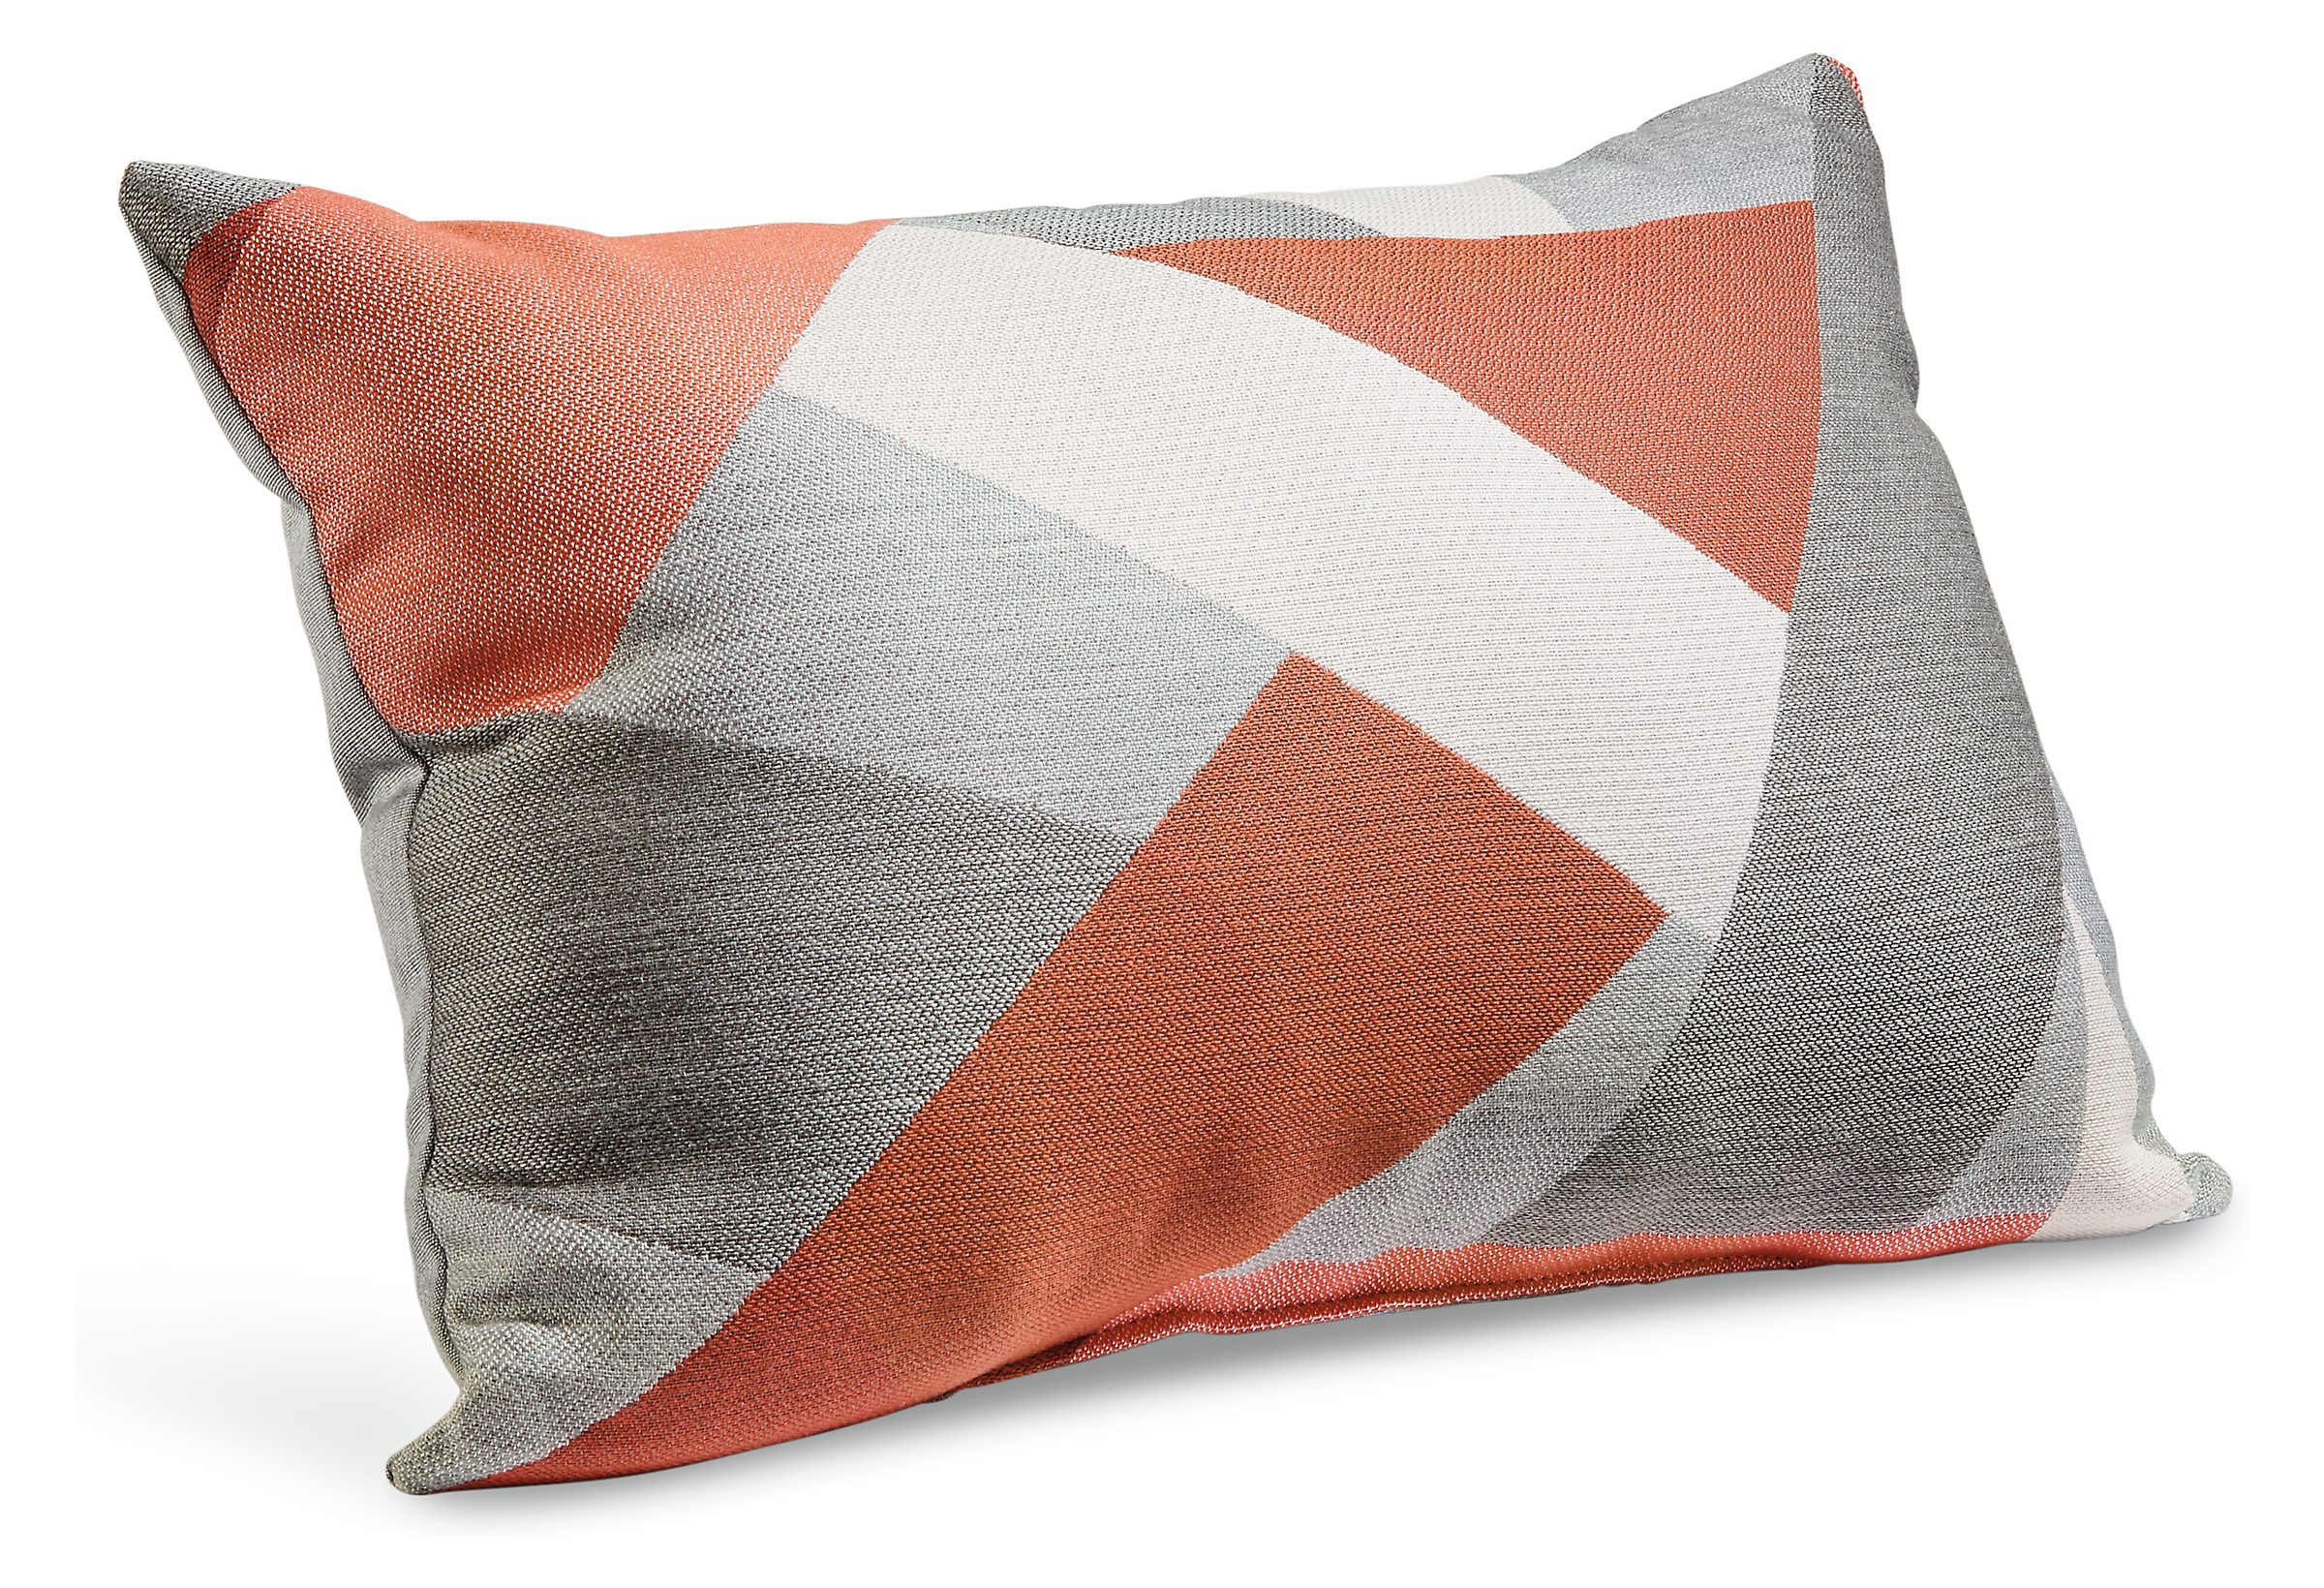 Refract 20w 13h Outdoor Pillow in Wye Orange/Cement